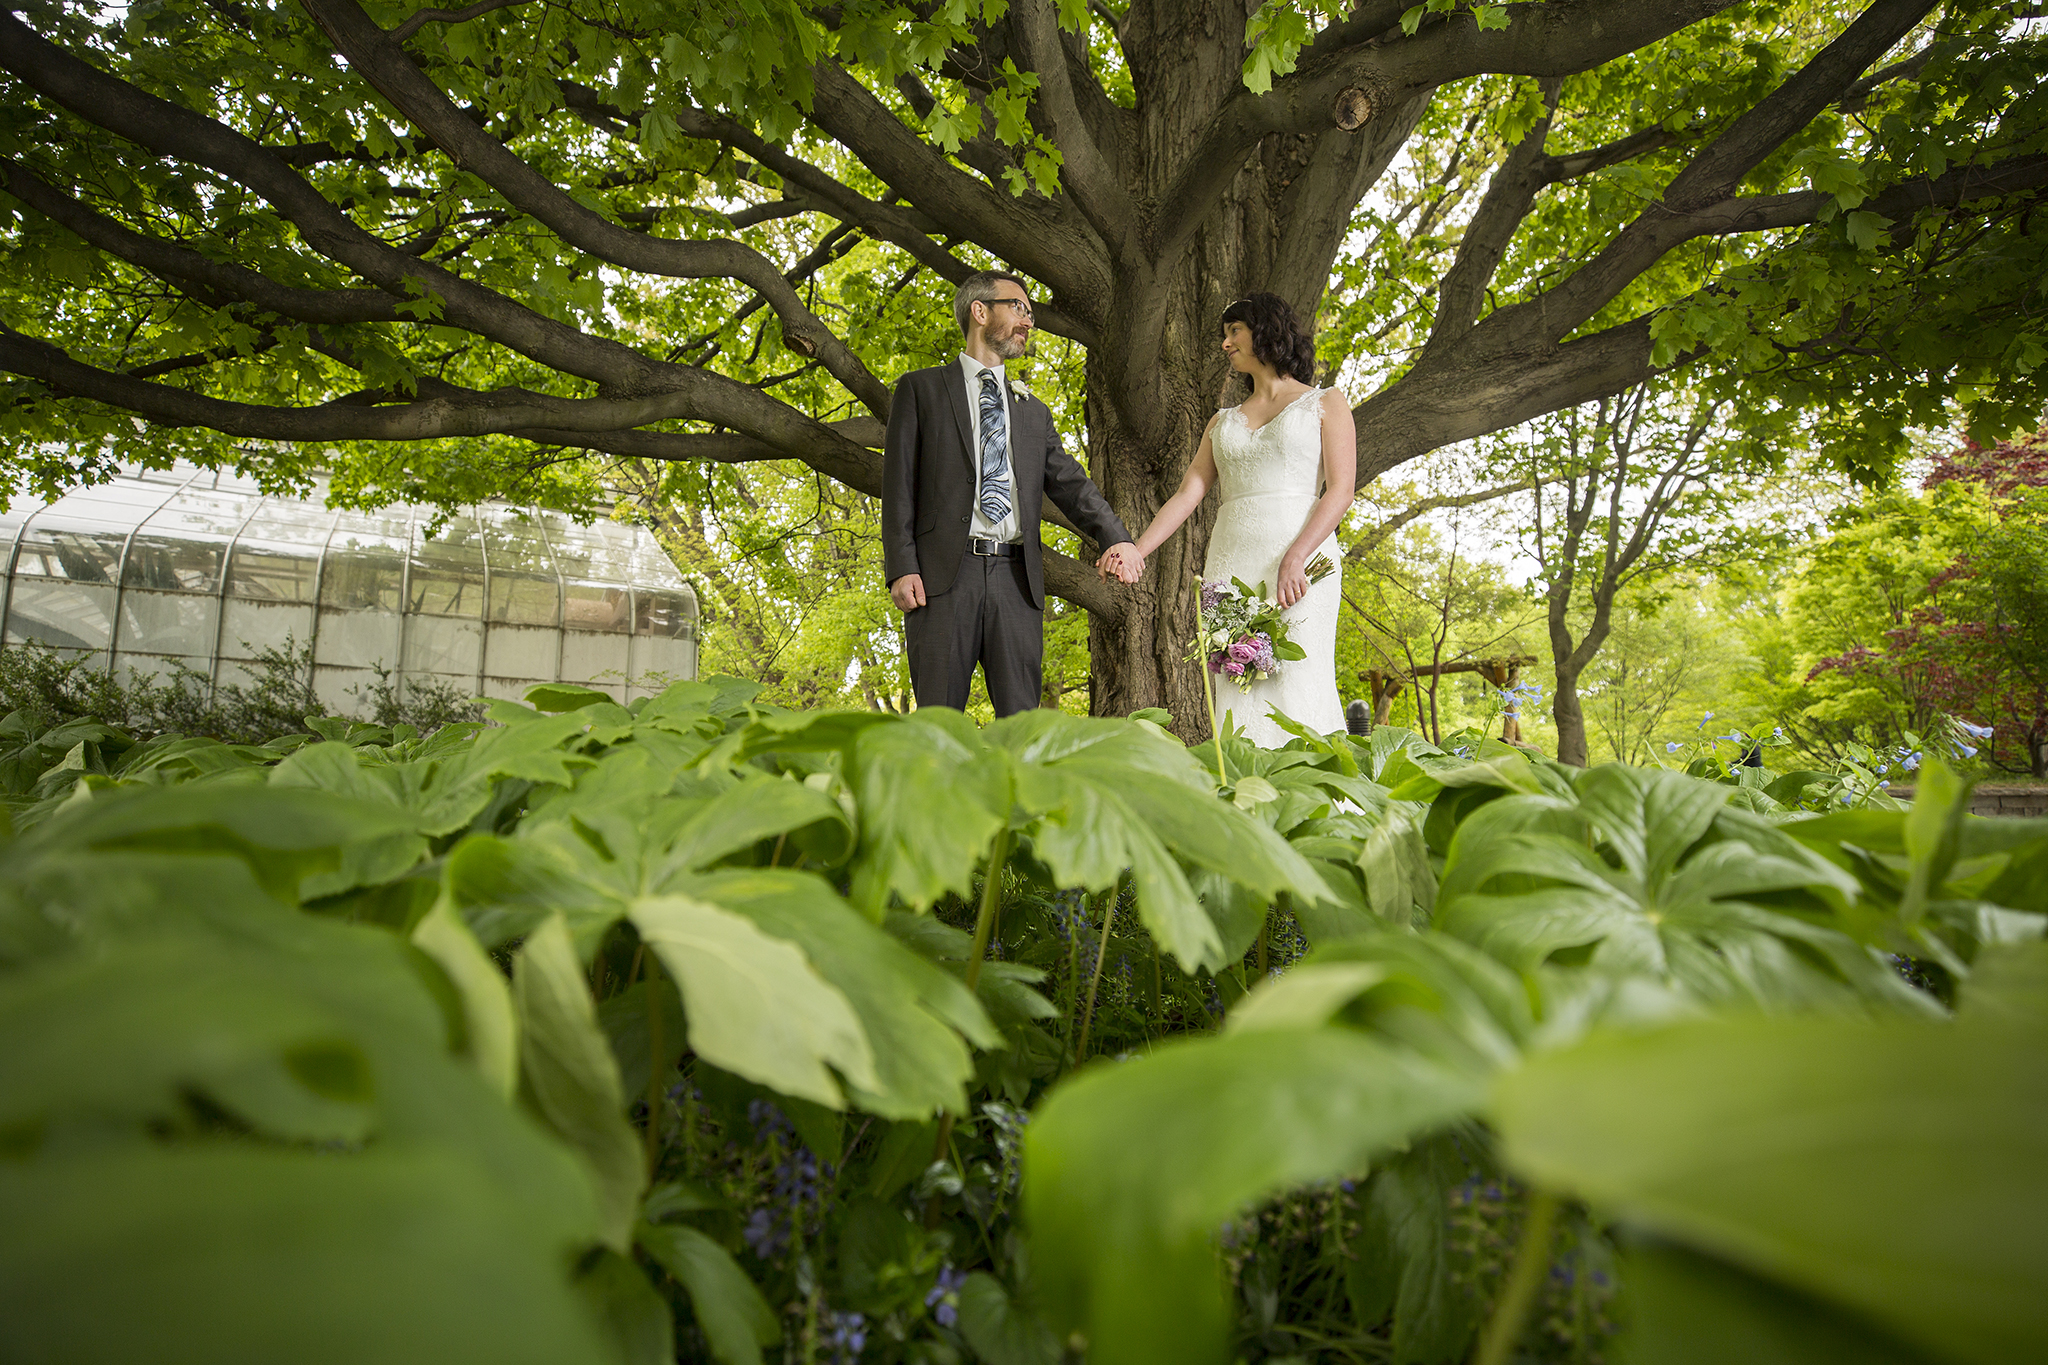 Bride and Groom in highland park Rochester NY on their wedding day.